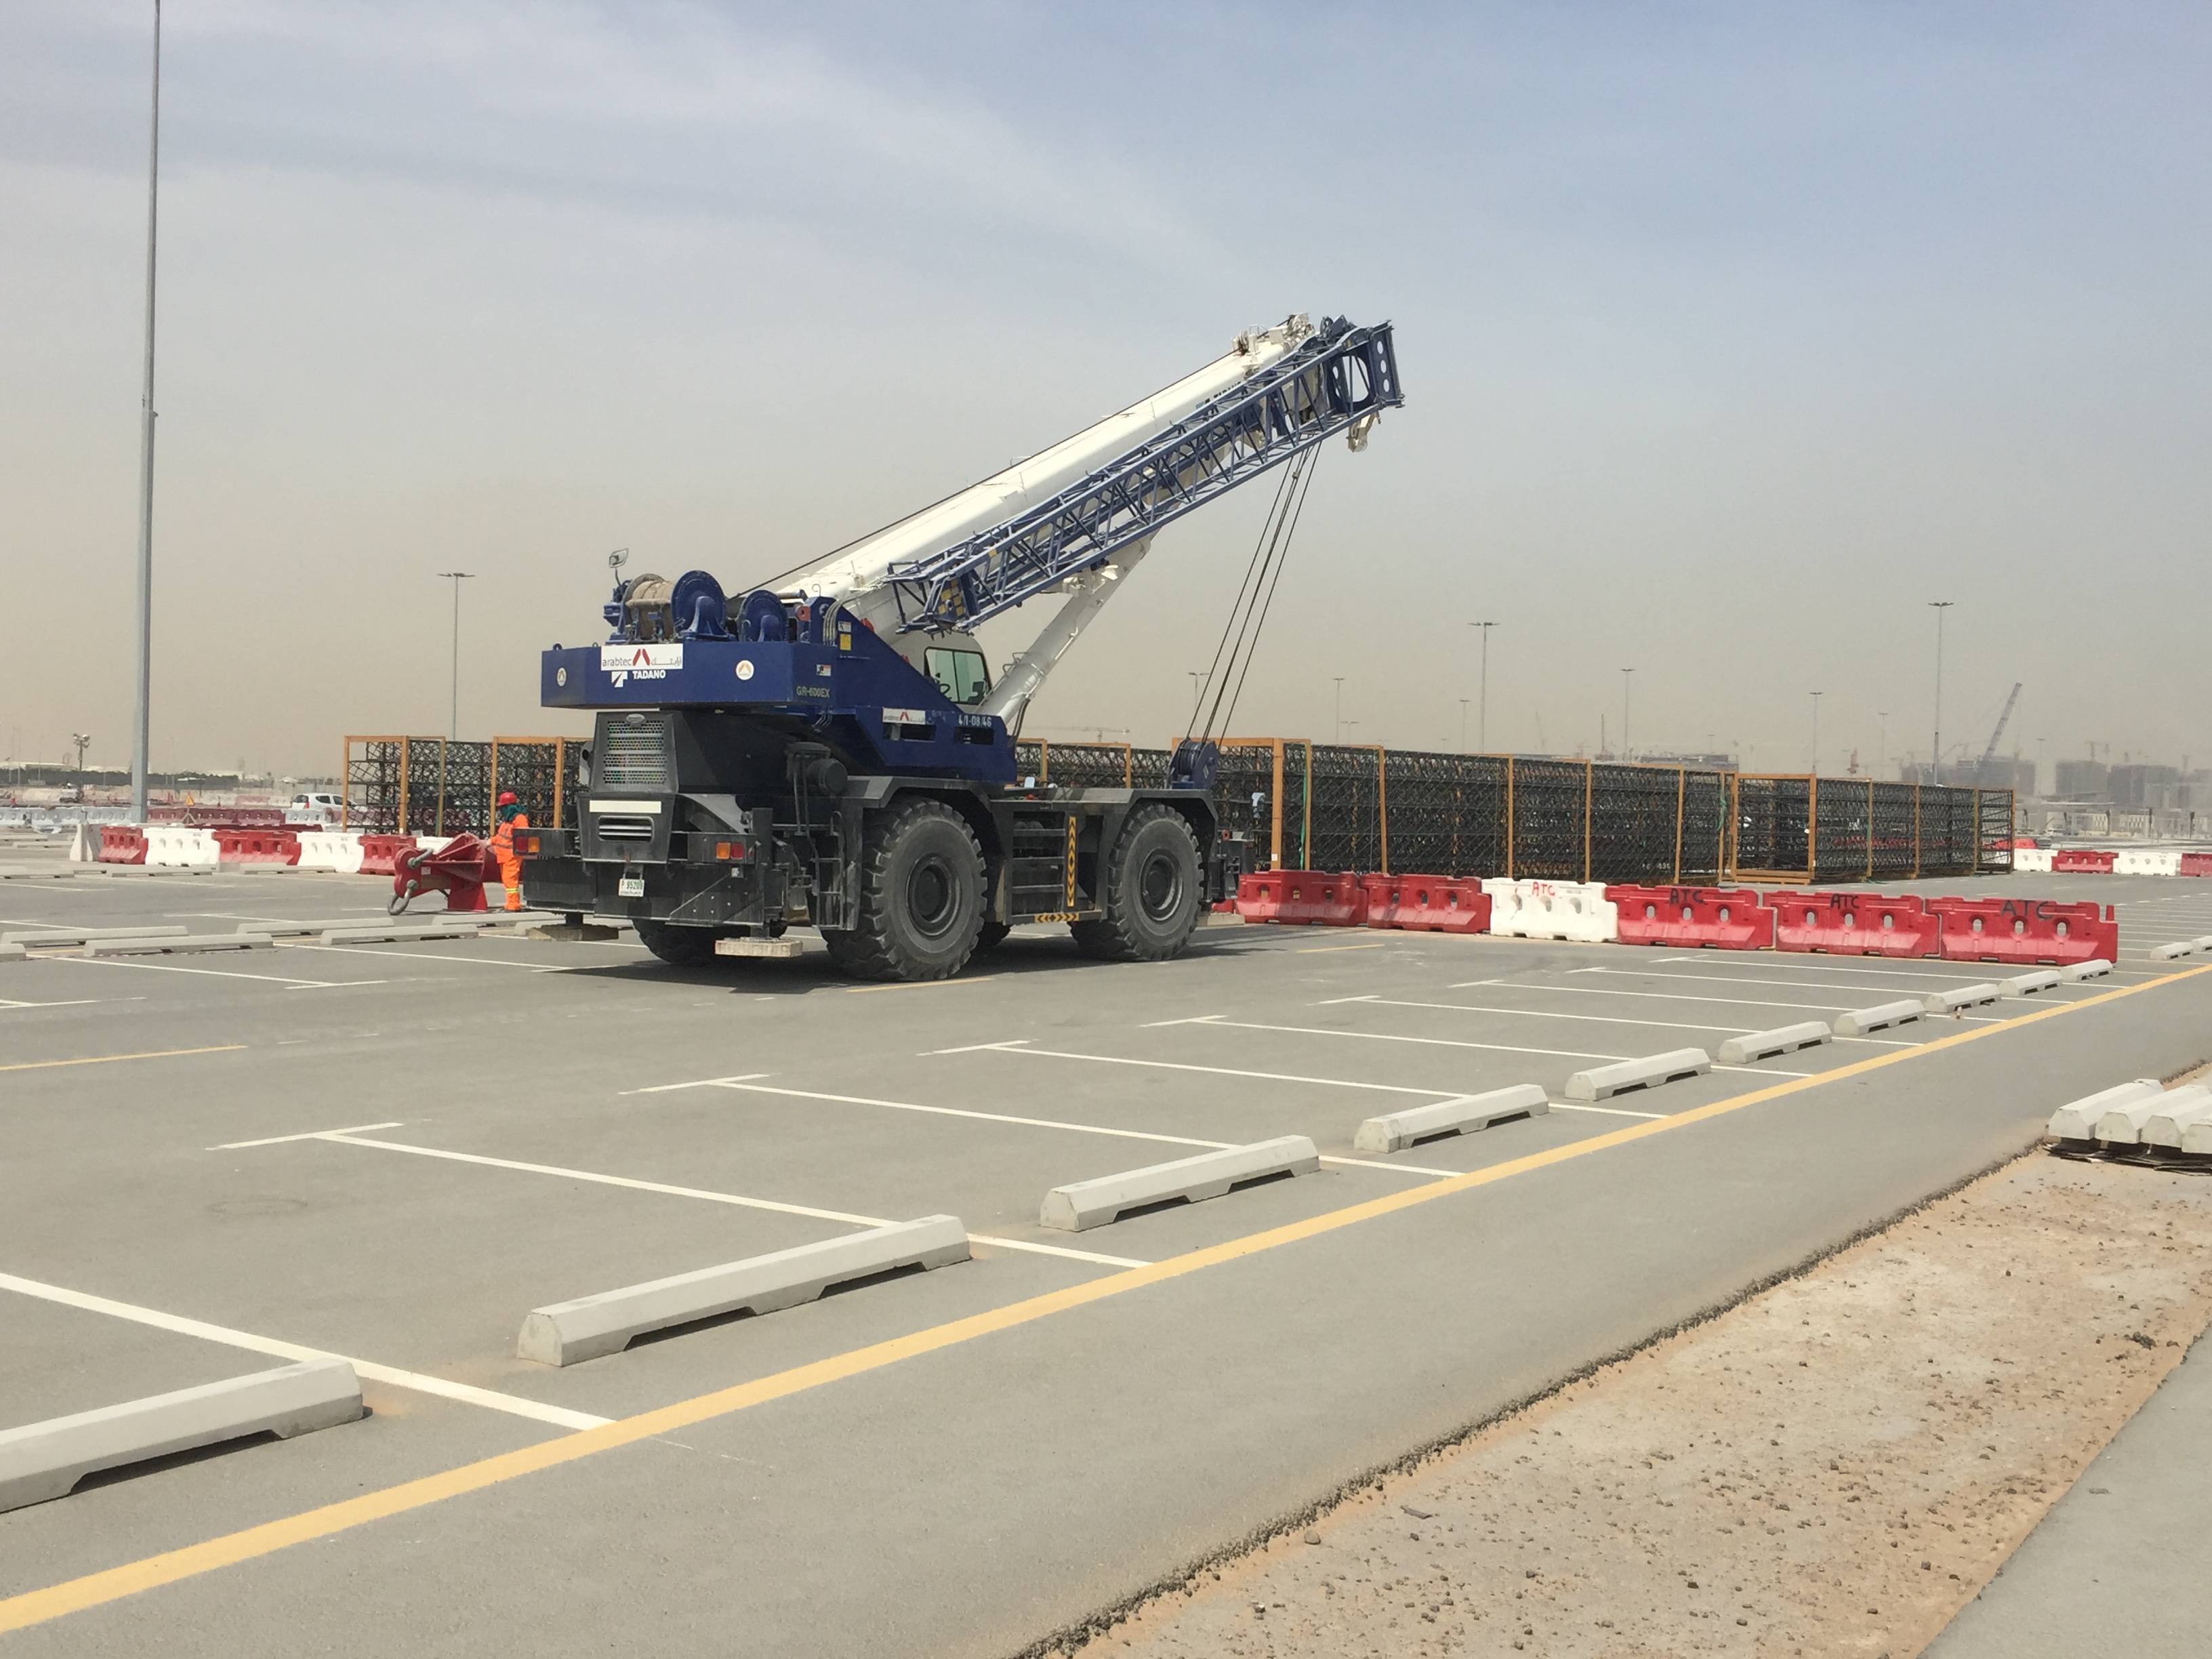 The Expo entry portals divided into sections, transported on trailer trucks from Germany to Antwerp and shipped to Jebel Ali and onto the Expo site in Dubai.